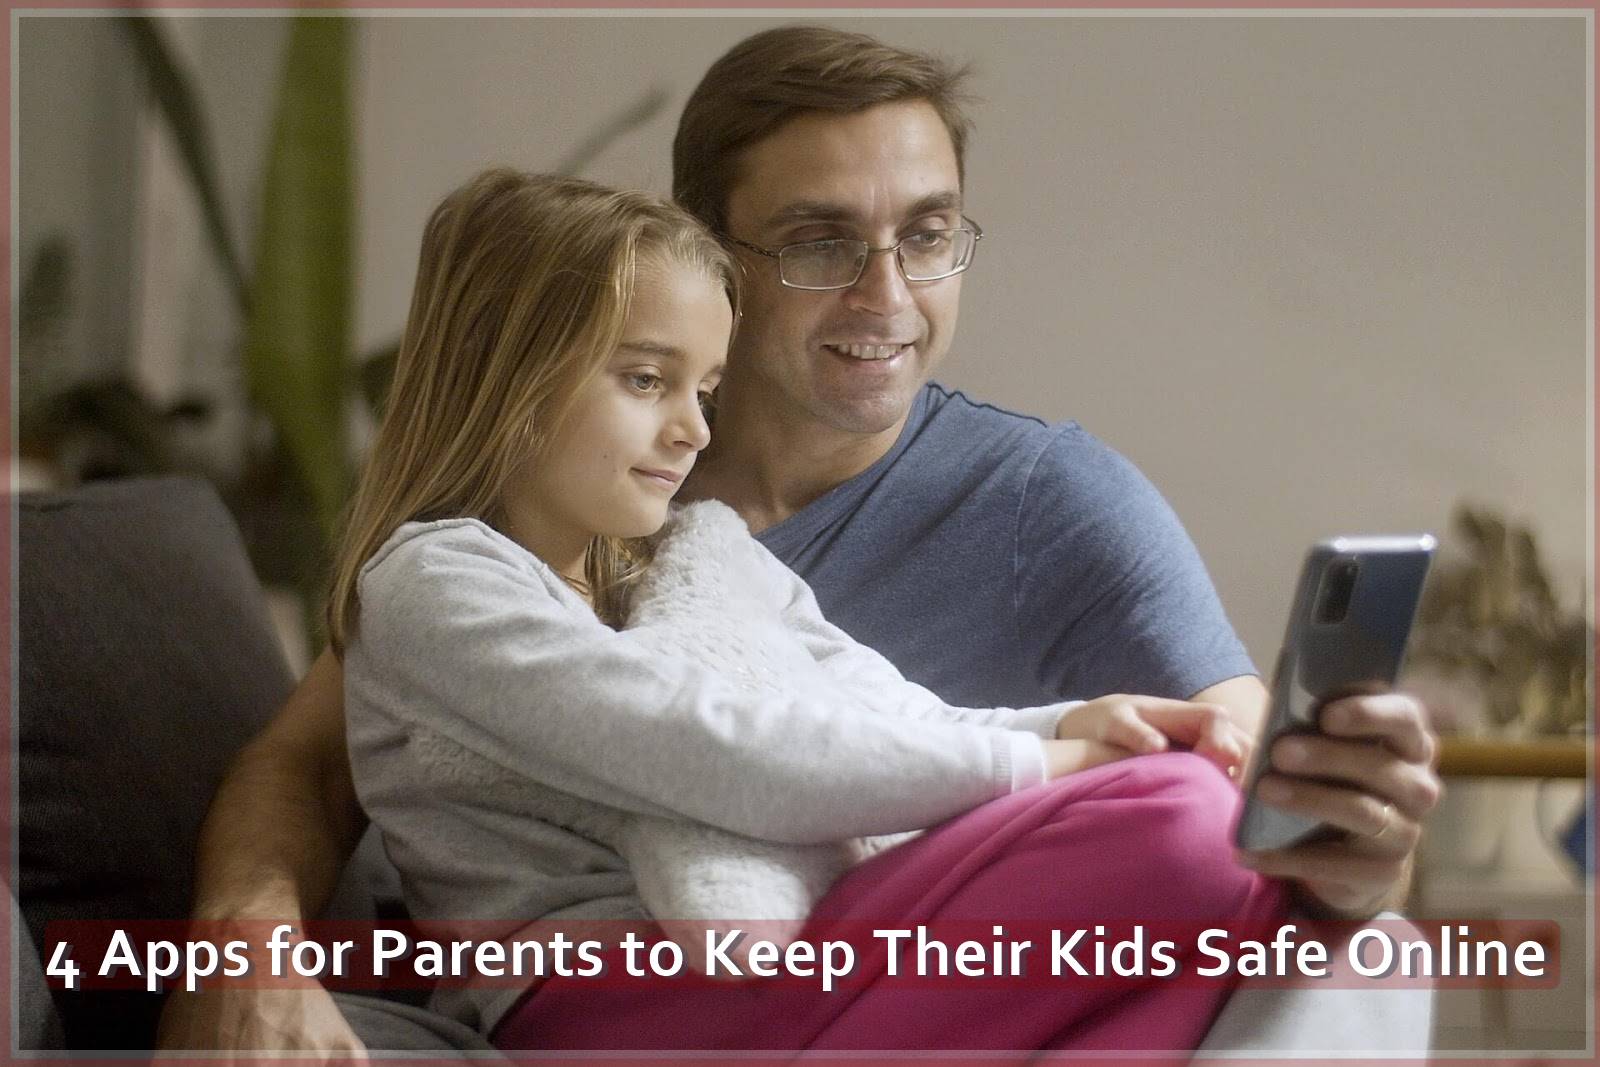 4 Apps for Parents to Keep Their Kids Safe Online